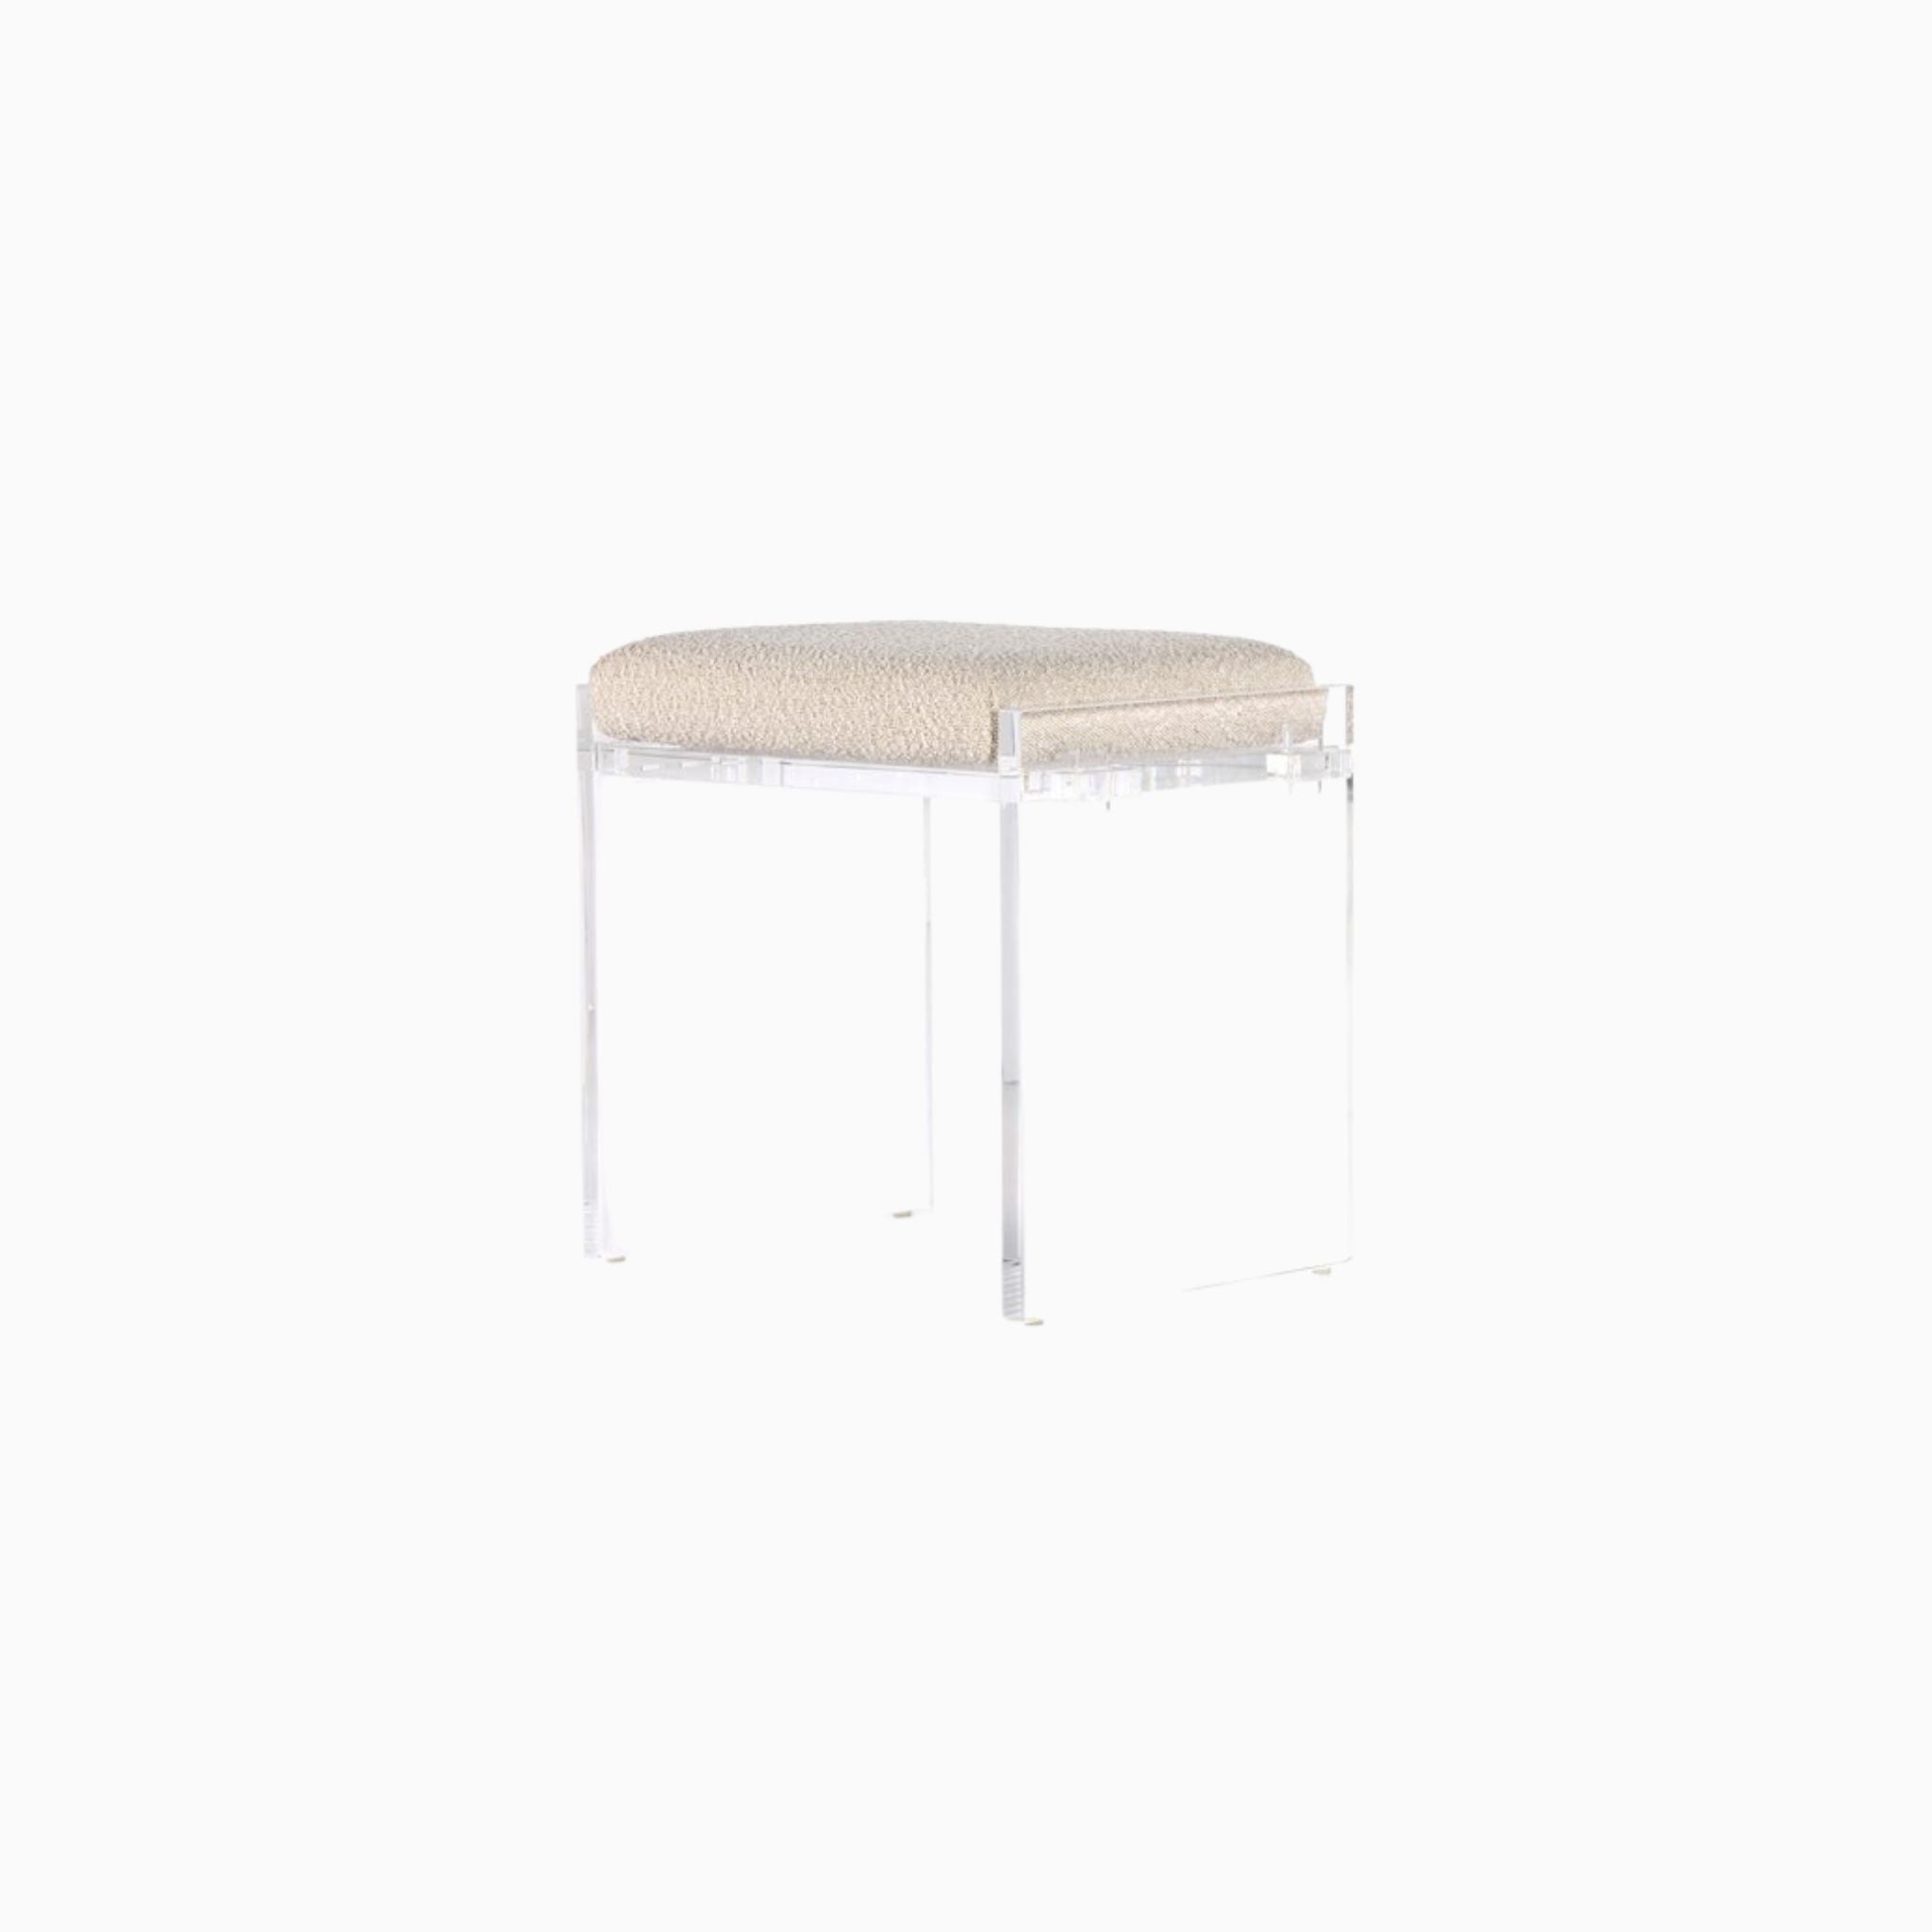 GERRARD ACCENT STOOL - Simply Elevated Home Furnishings 